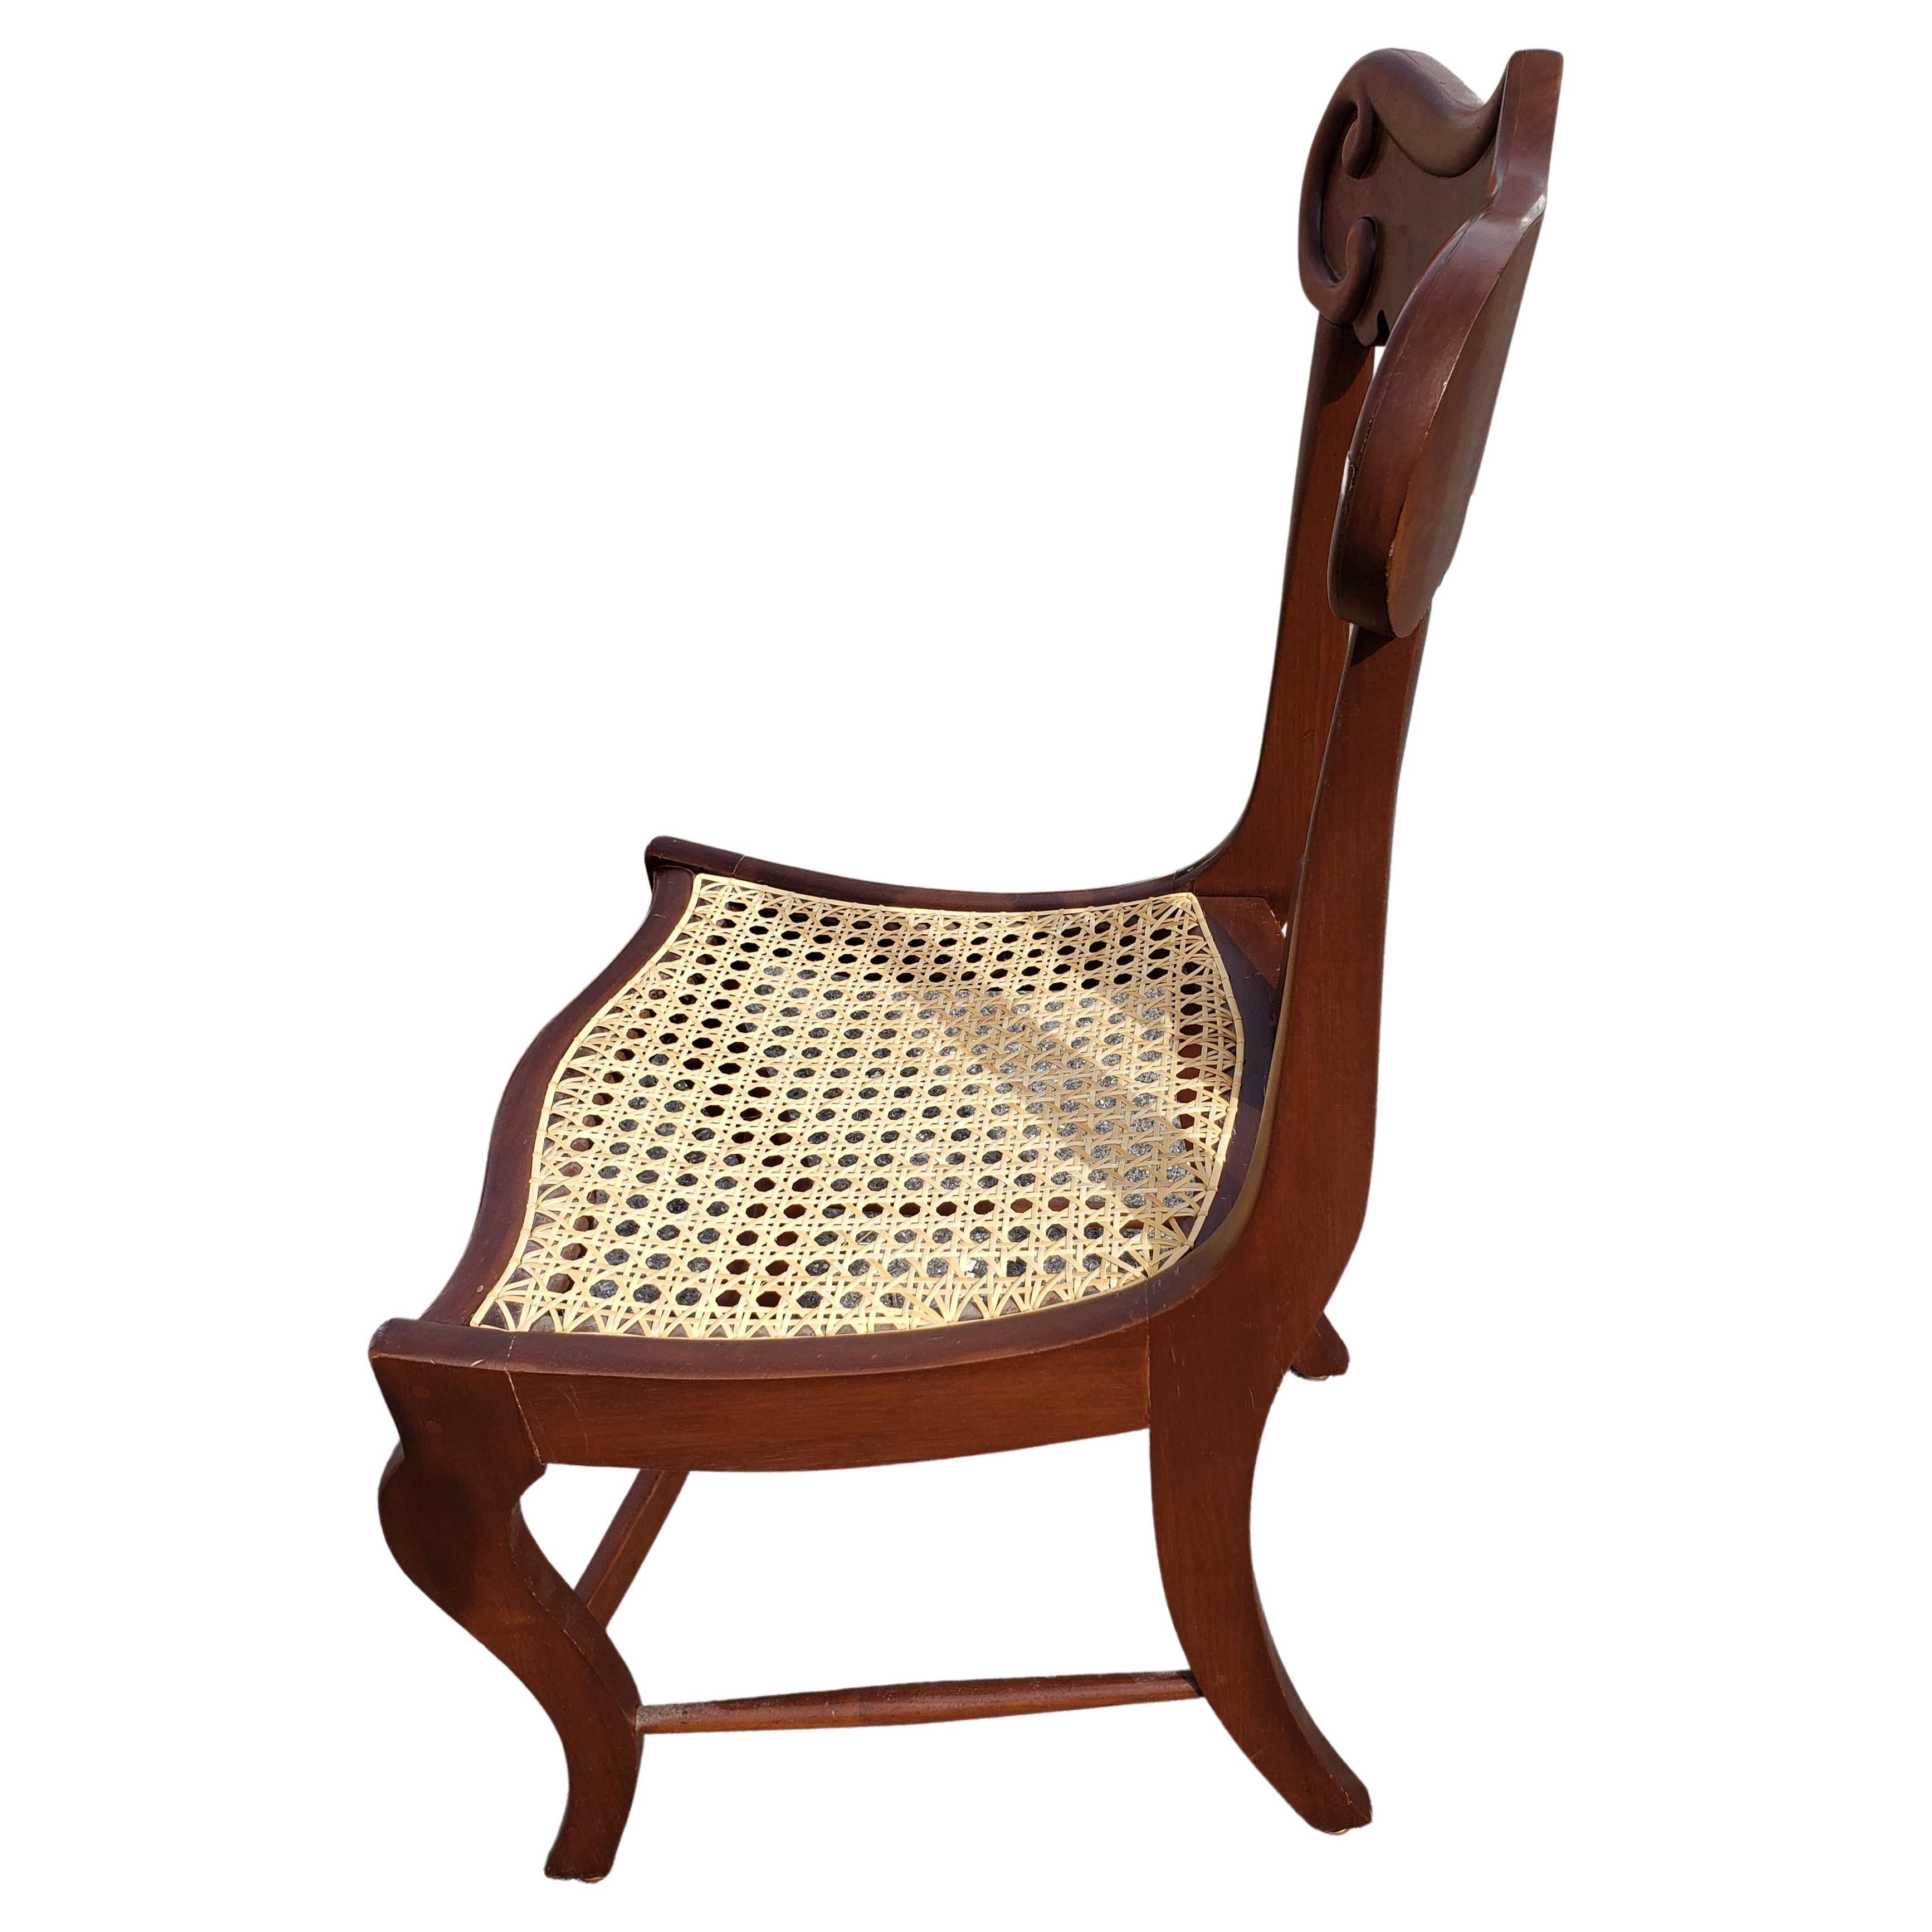 19th Century American Empire Flame Mahogany Cane Seat Chairs, circa 1890s a Pair For Sale